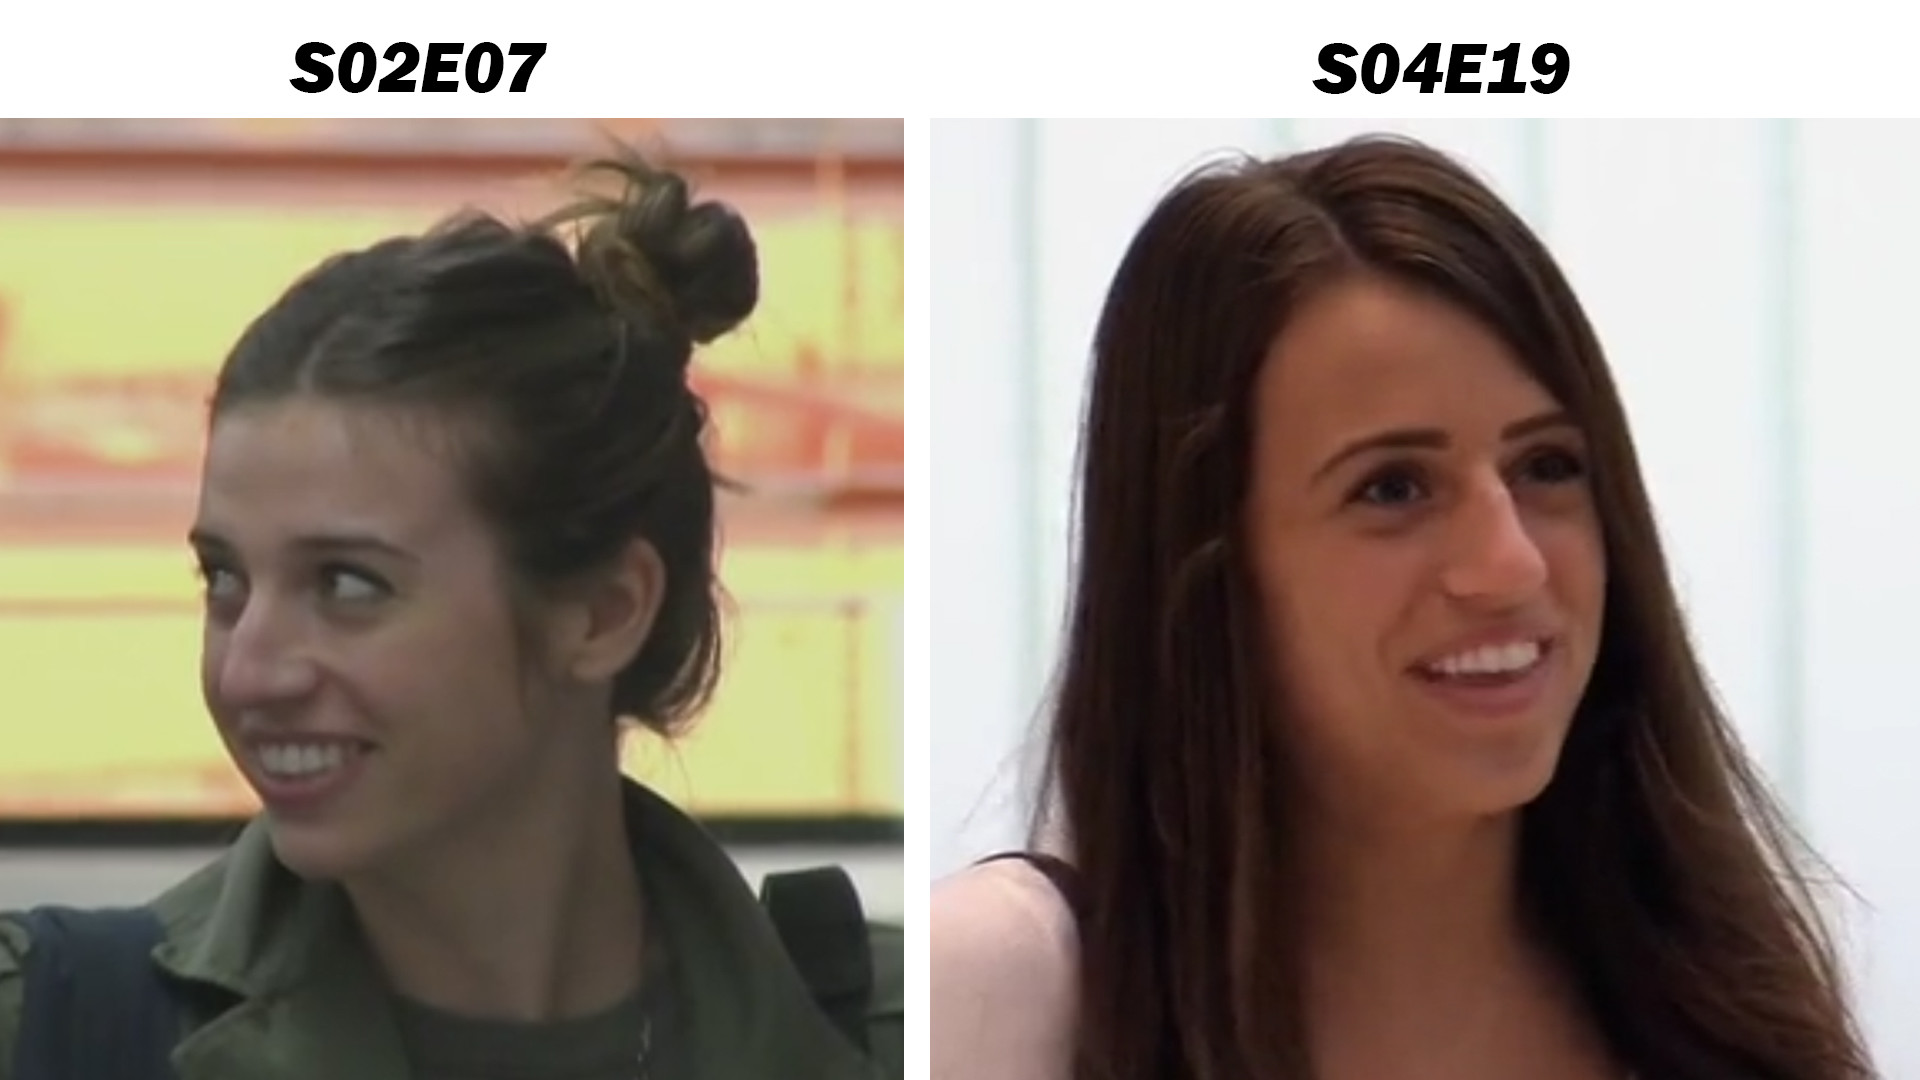 1920x1080 I love Impractical Jokers, favorite show on television. But I noticed  something that broke my heart.